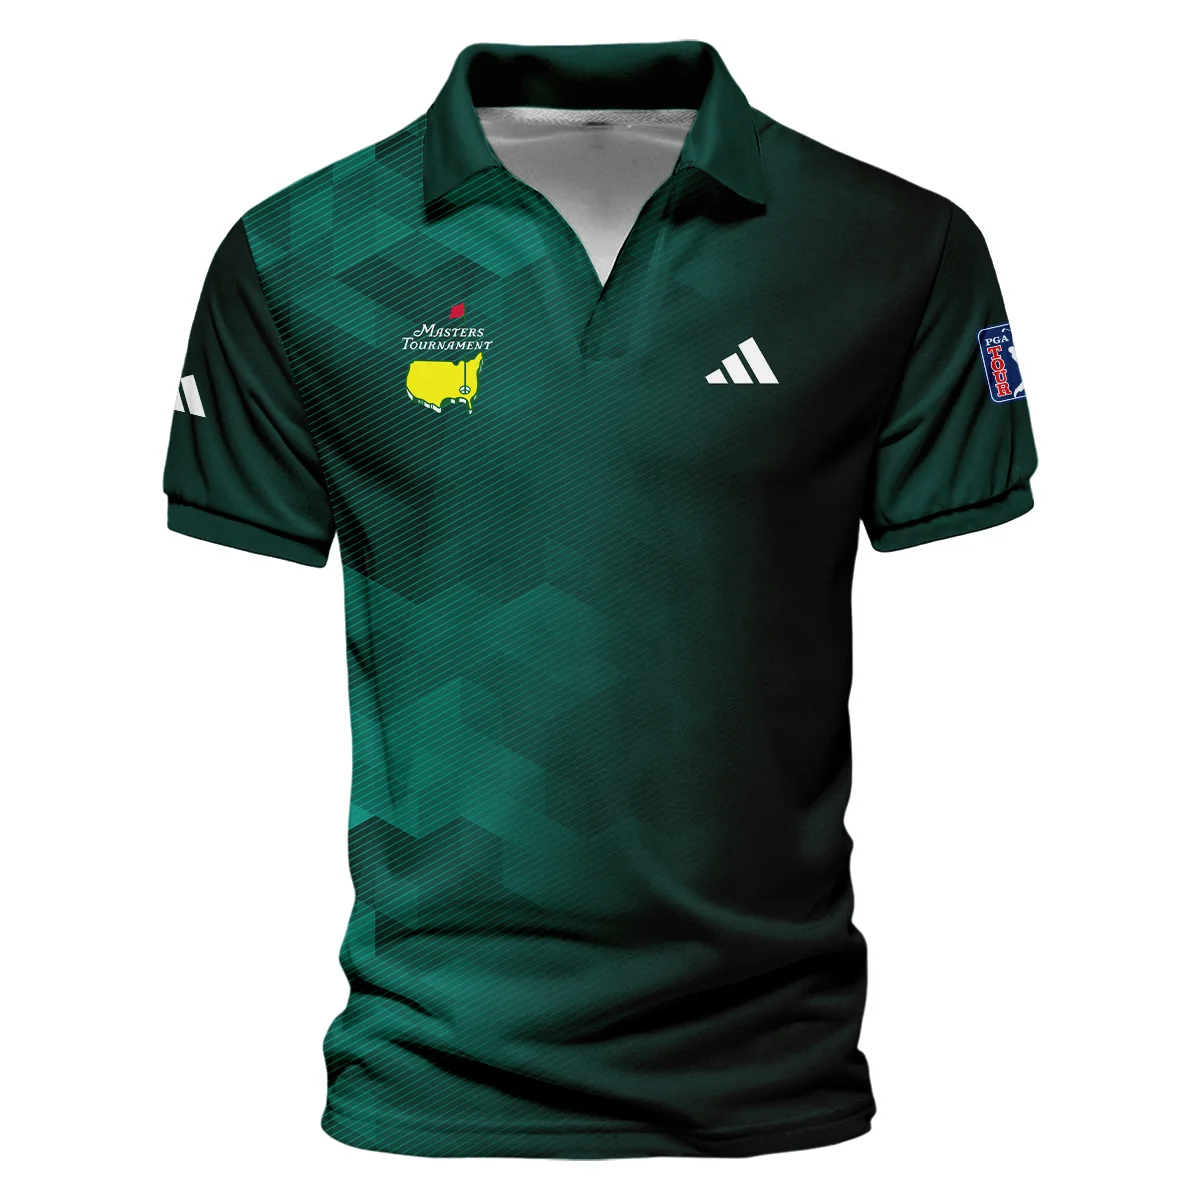 Adidas Golf Sport Dark Green Gradient Abstract Background Masters Tournament Vneck Polo Shirt Style Classic Polo Shirt For Men